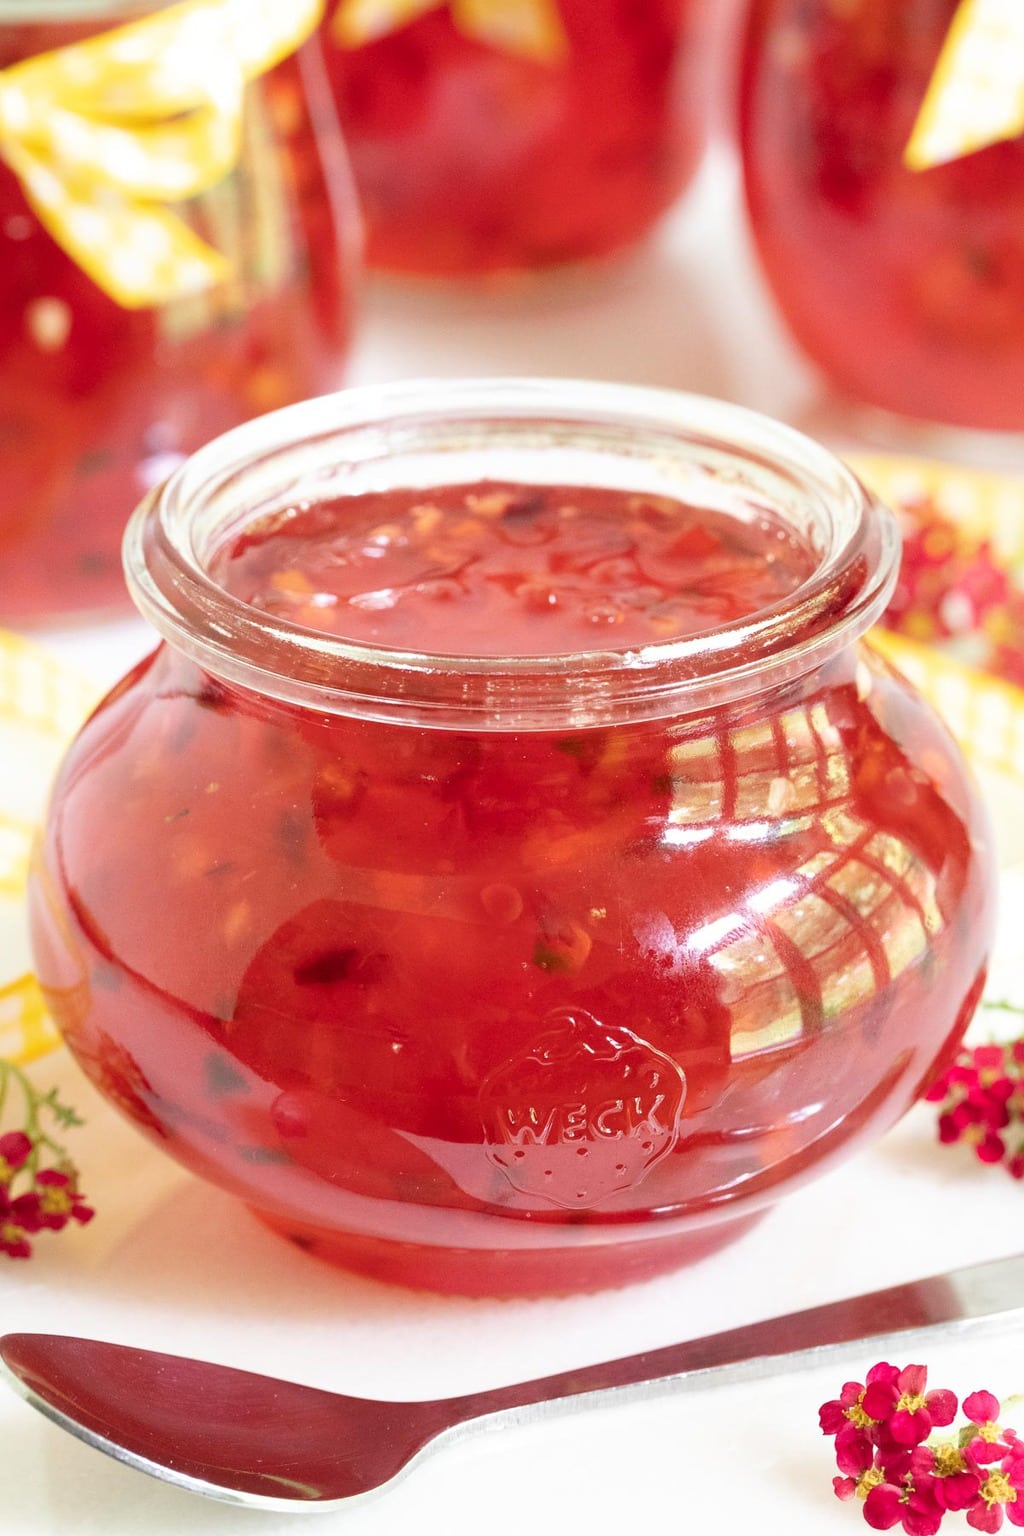 Vertical closeup photo of a glass Weck jar of Plum Ginger Pepper Jelly with additional jars of the jelly in the background.